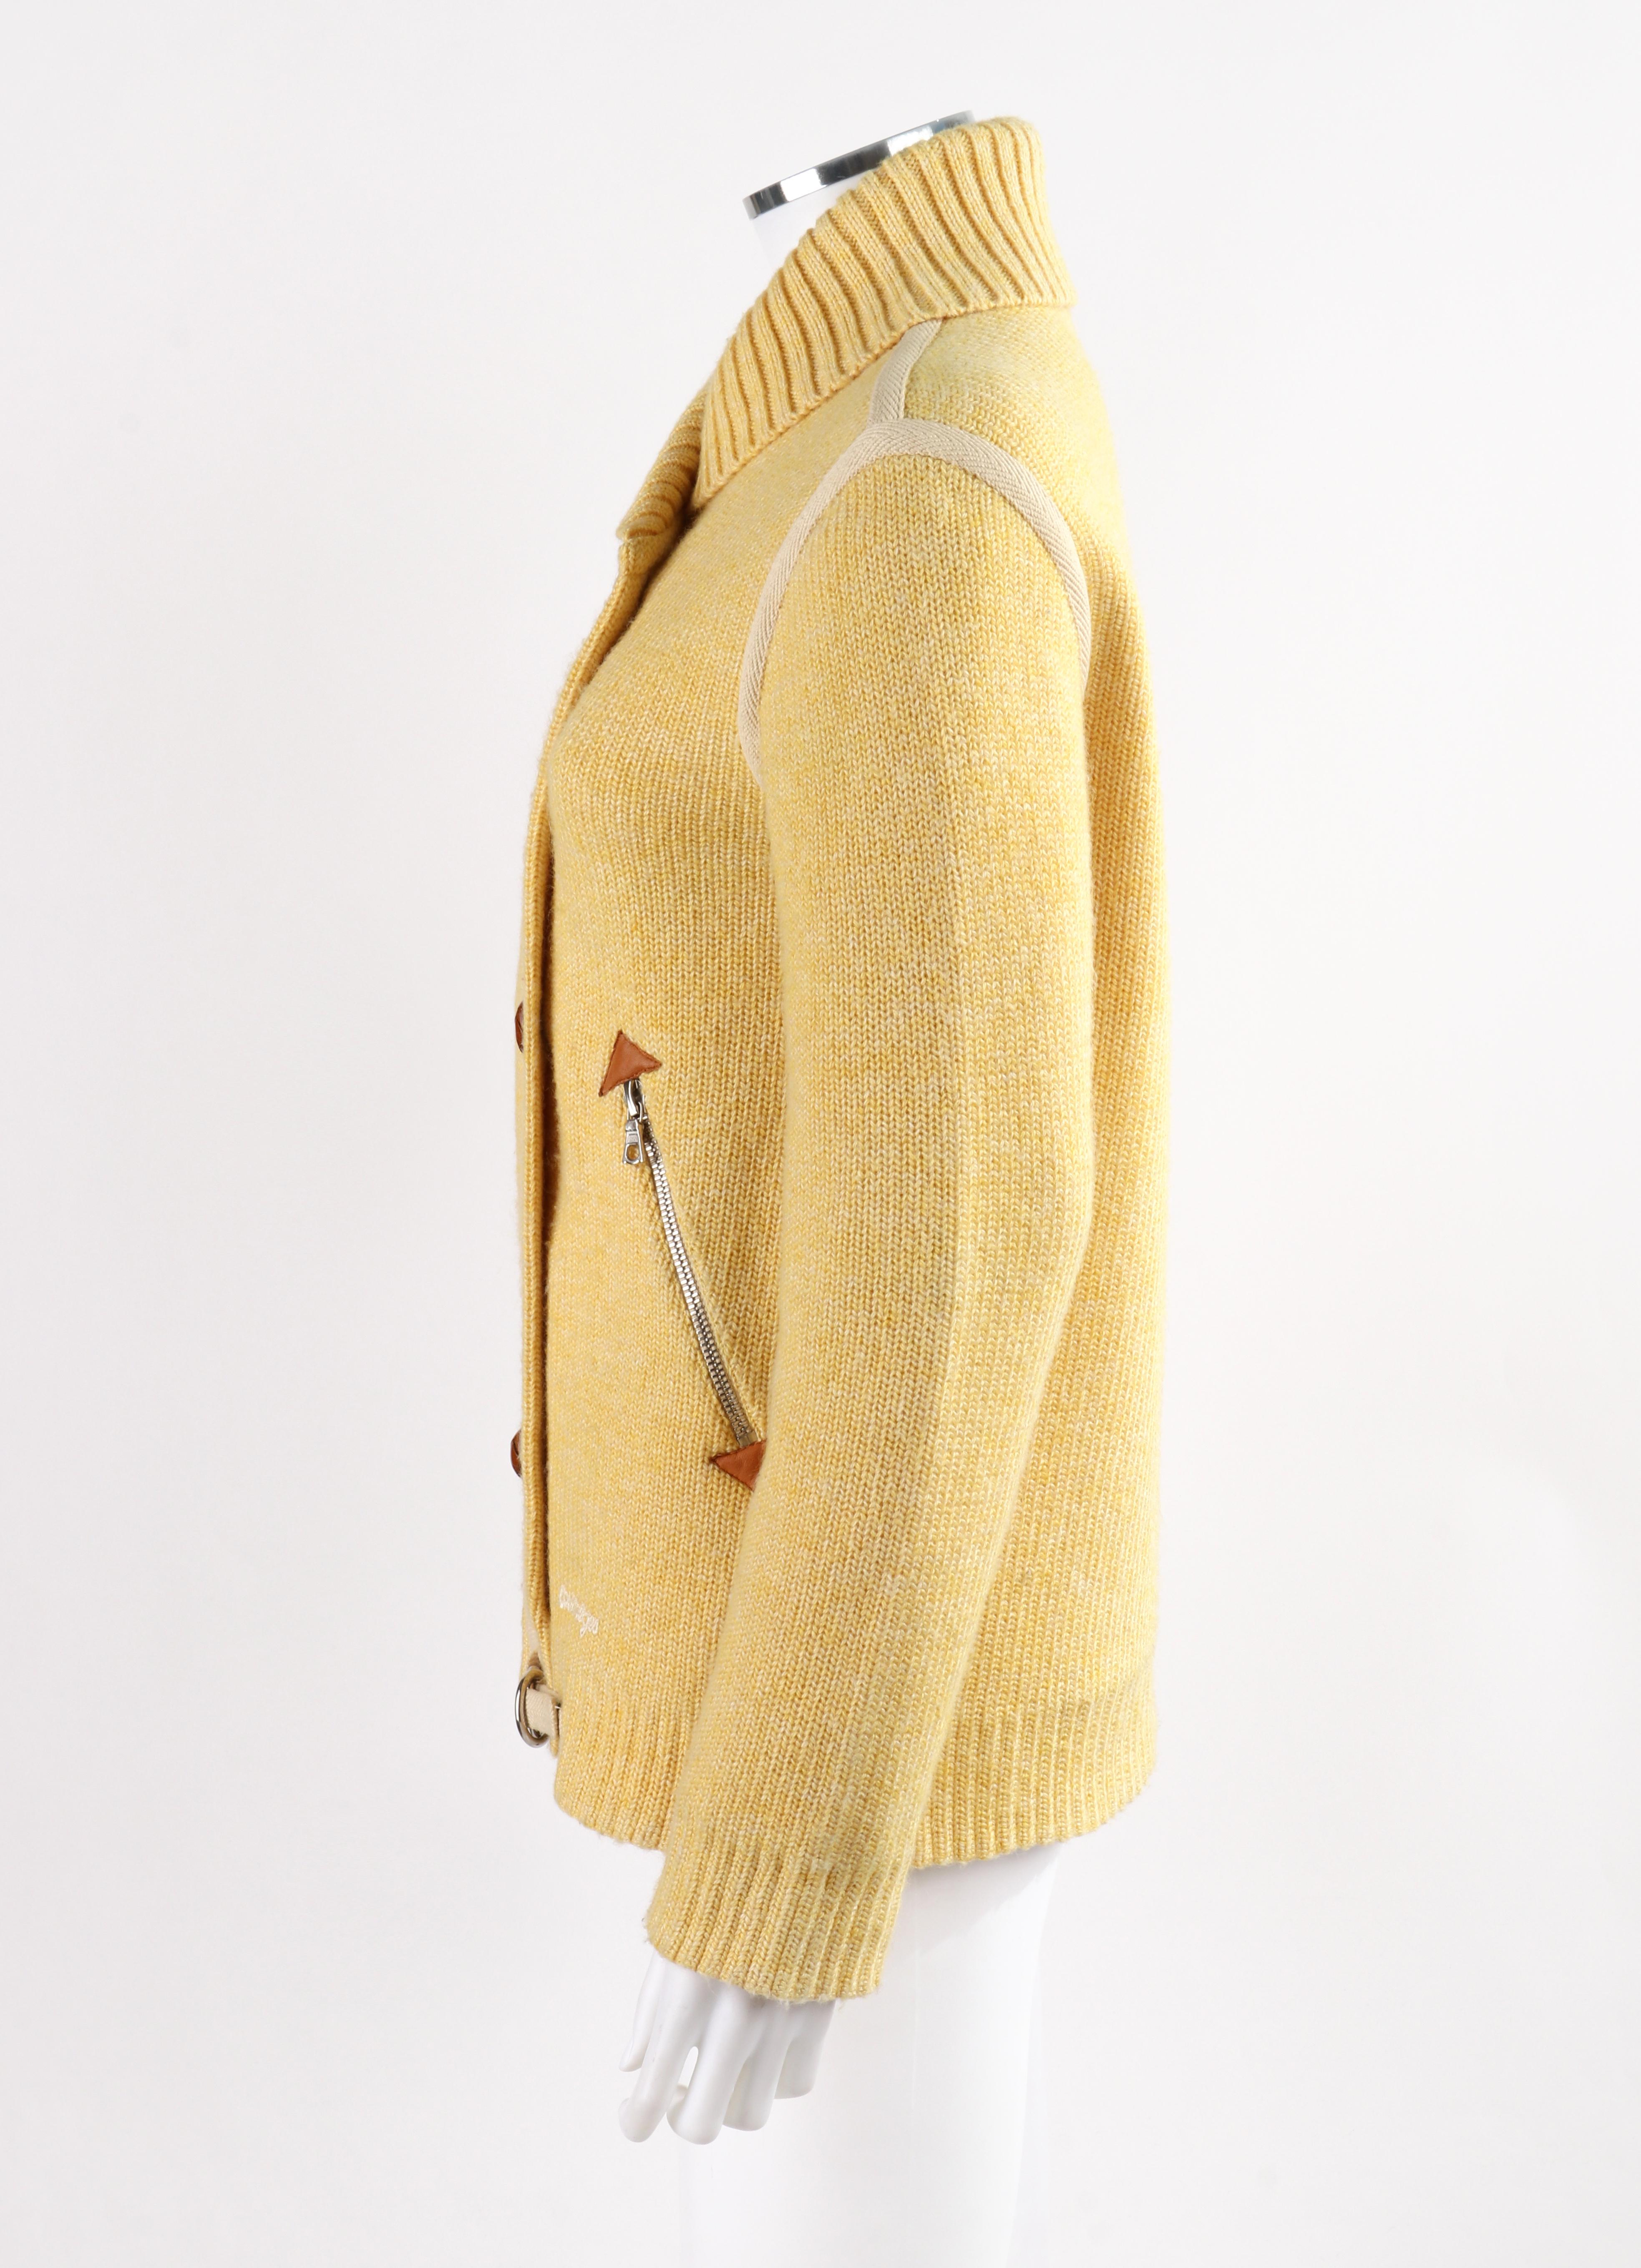 COURREGES c.1980’s Yellow Knit Double Breasted Leather Cardigan Sweater Jacket 1